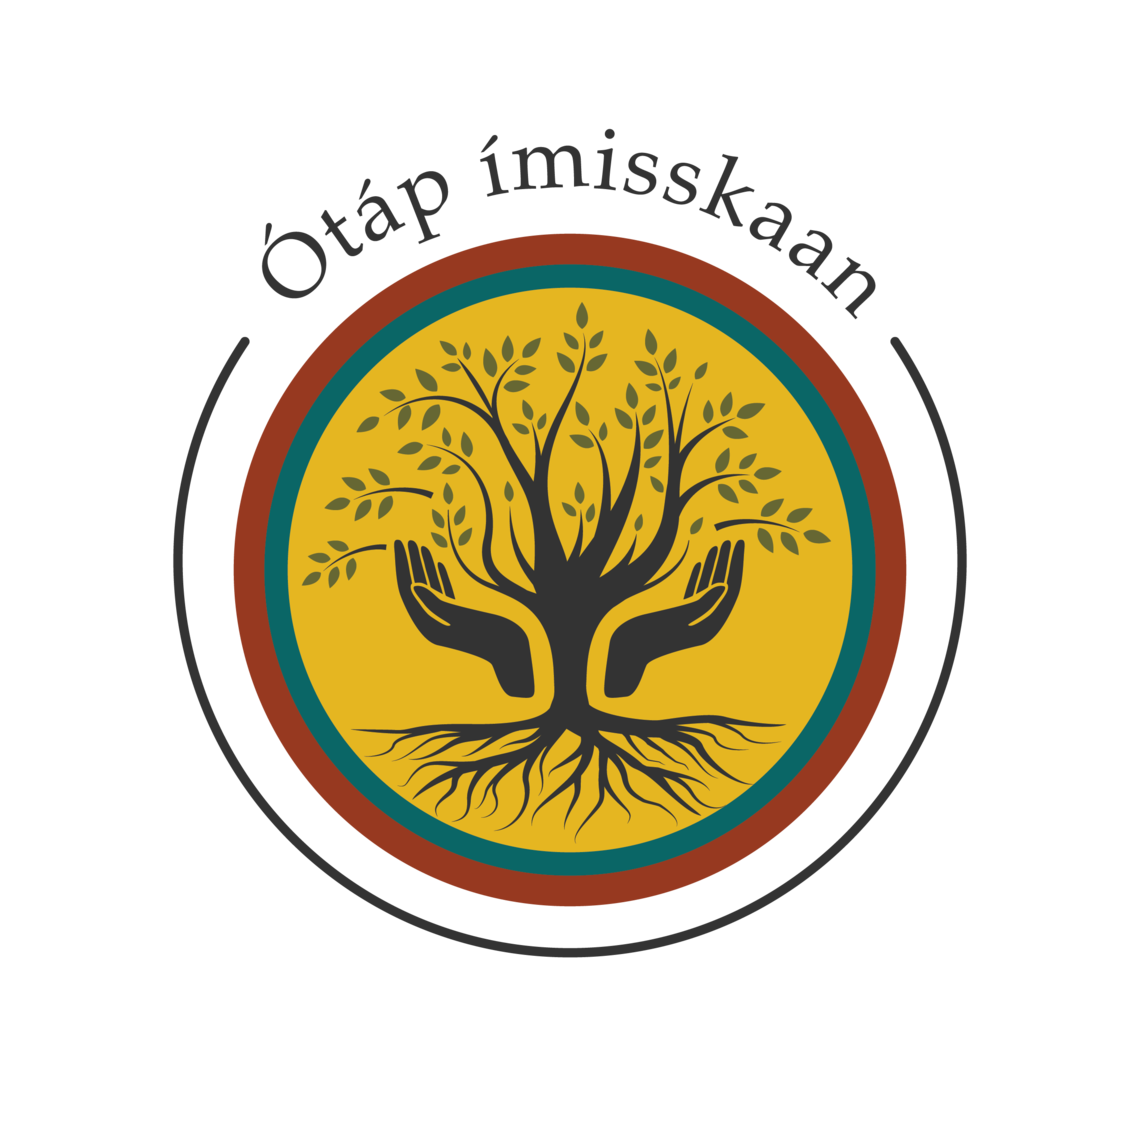 Ótáp ímisskaan logo: A tree is surrounded by a pair of hands, encircled by yellow, green and red circles.